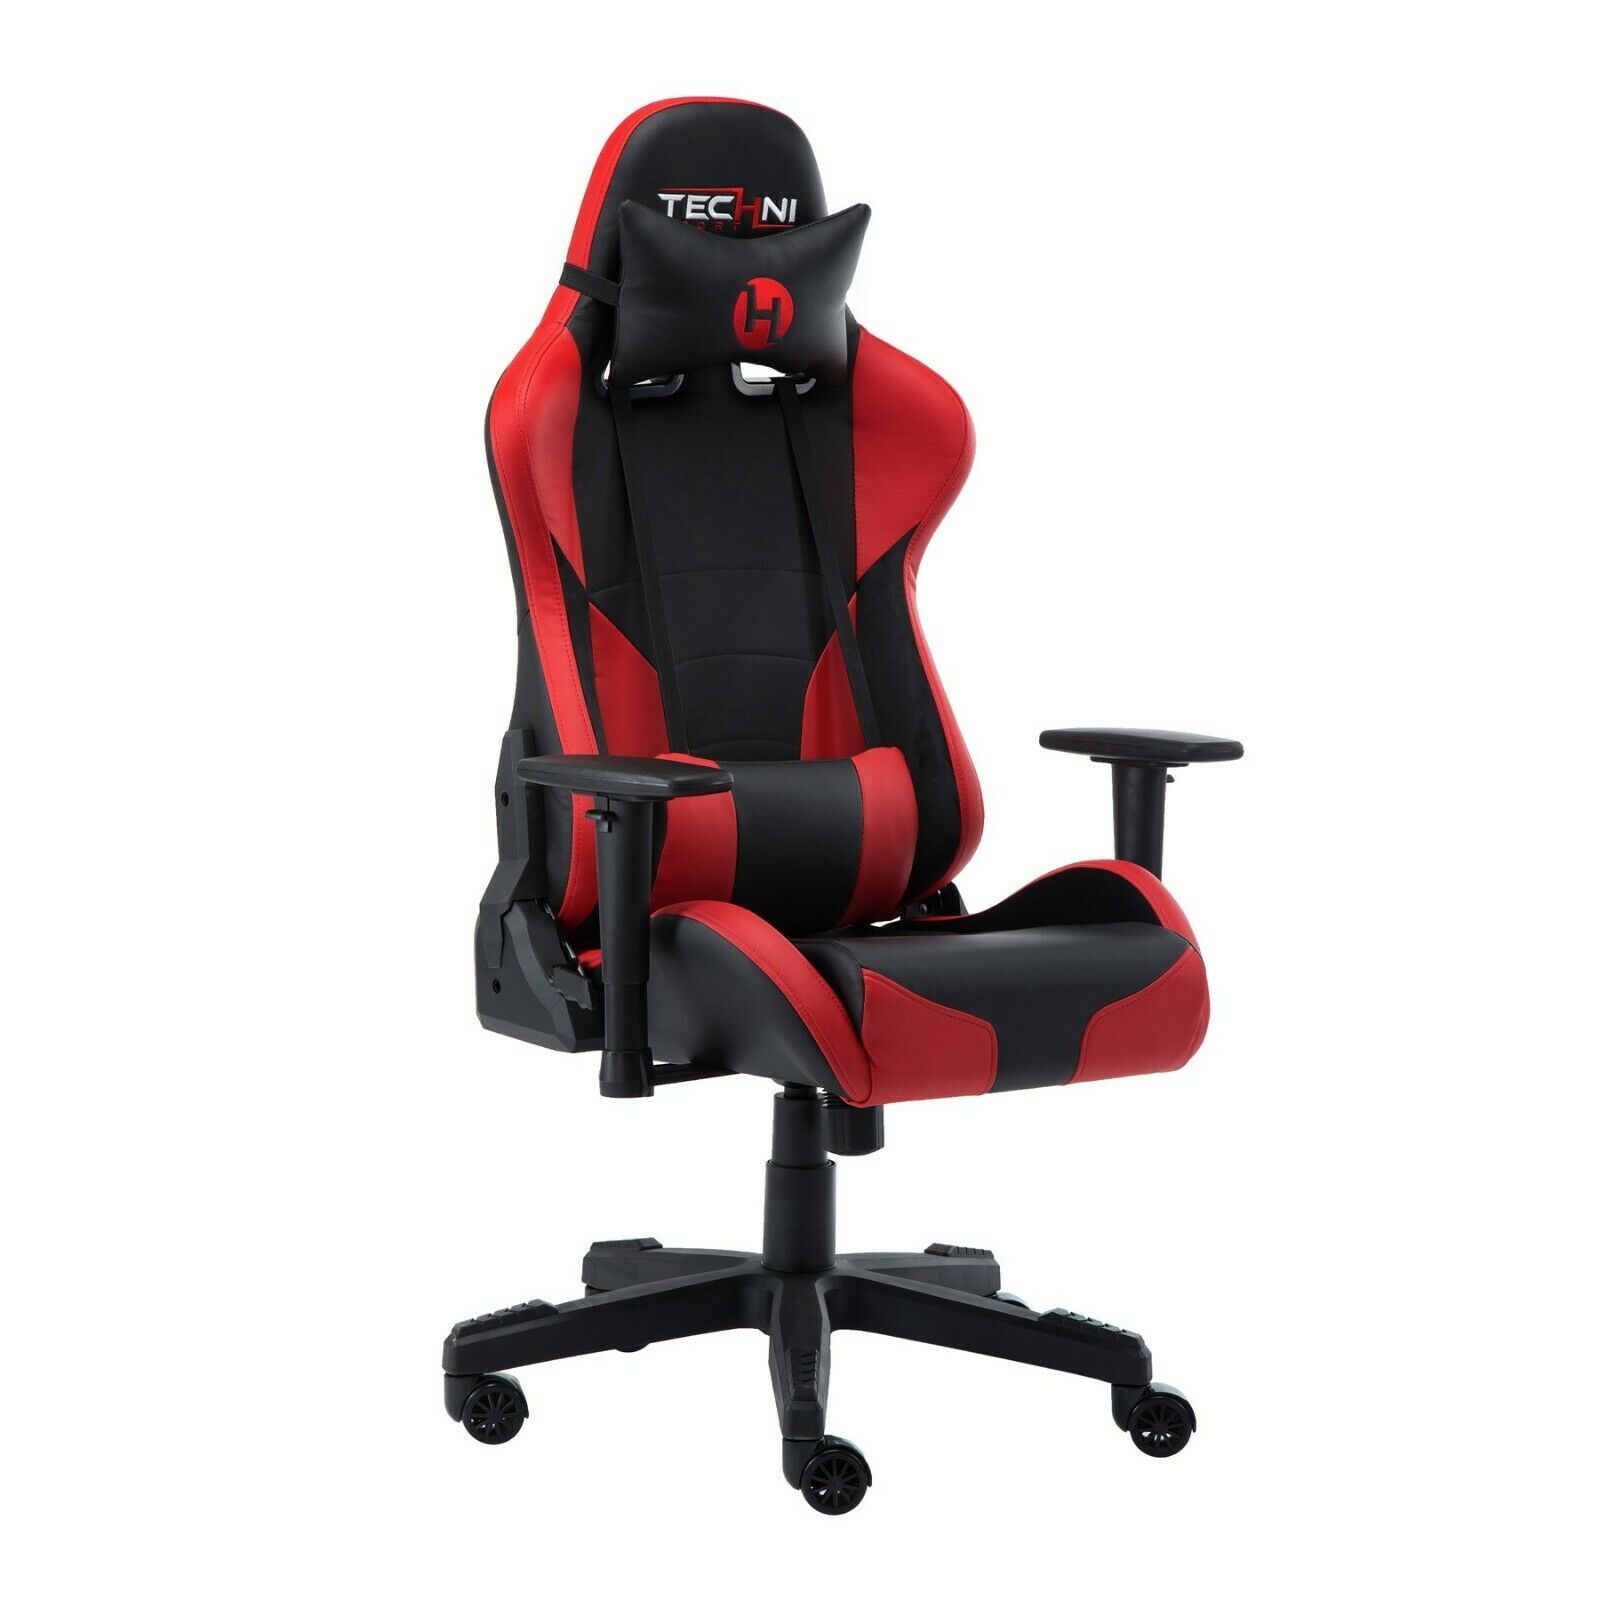 Techni Sport TS-90 PC Gaming Chair with High Back & 2D Padded Arms for Office